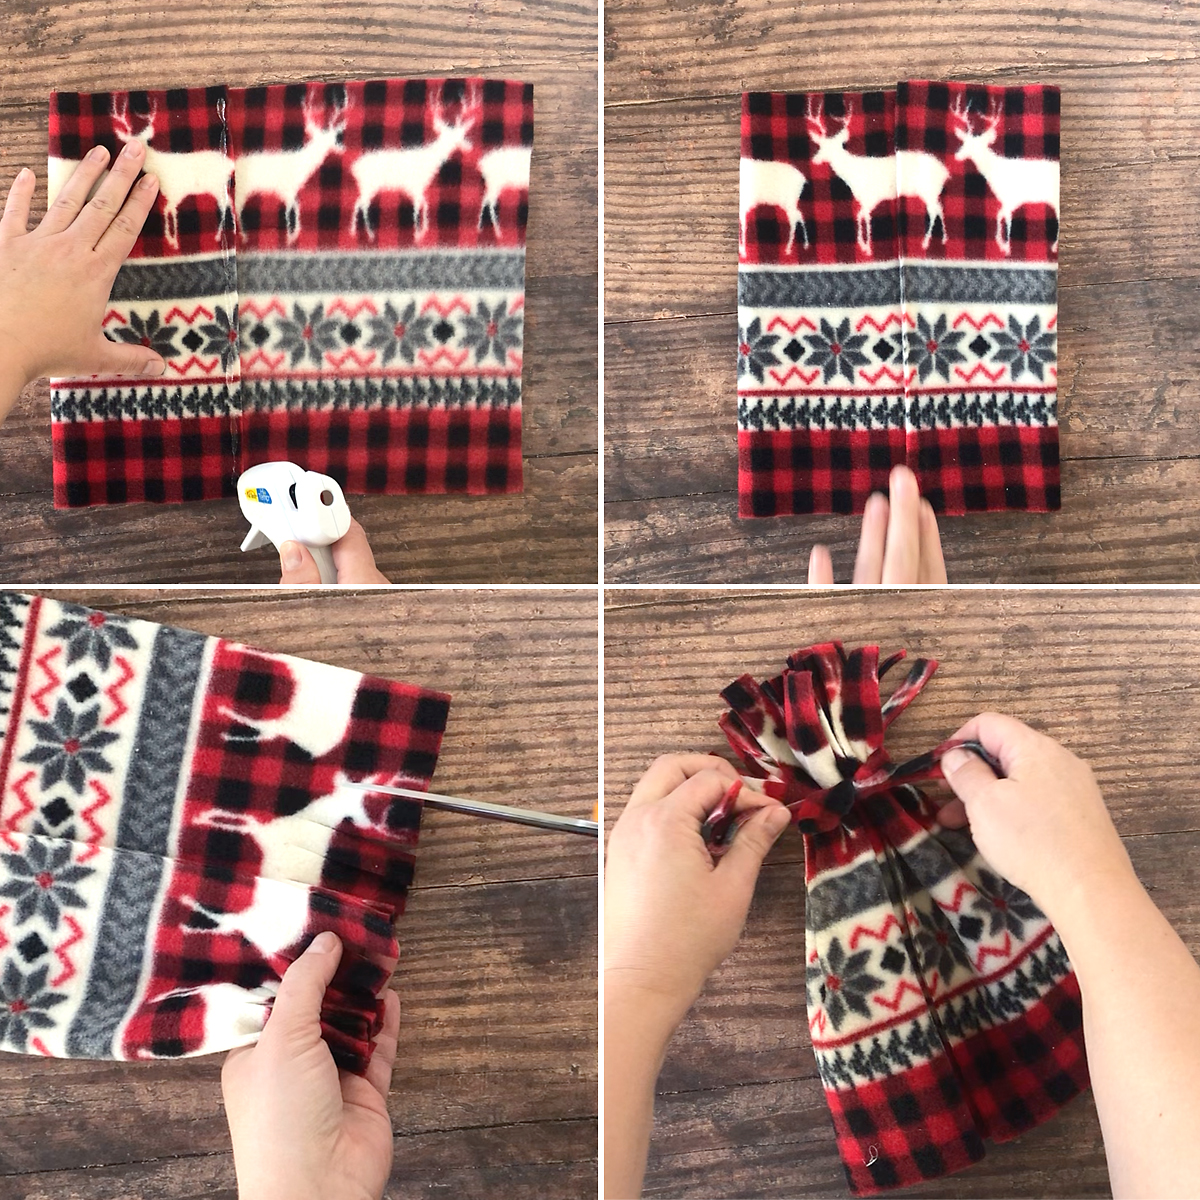 How to make a hat for a toilet paper snowman Christmas craft.